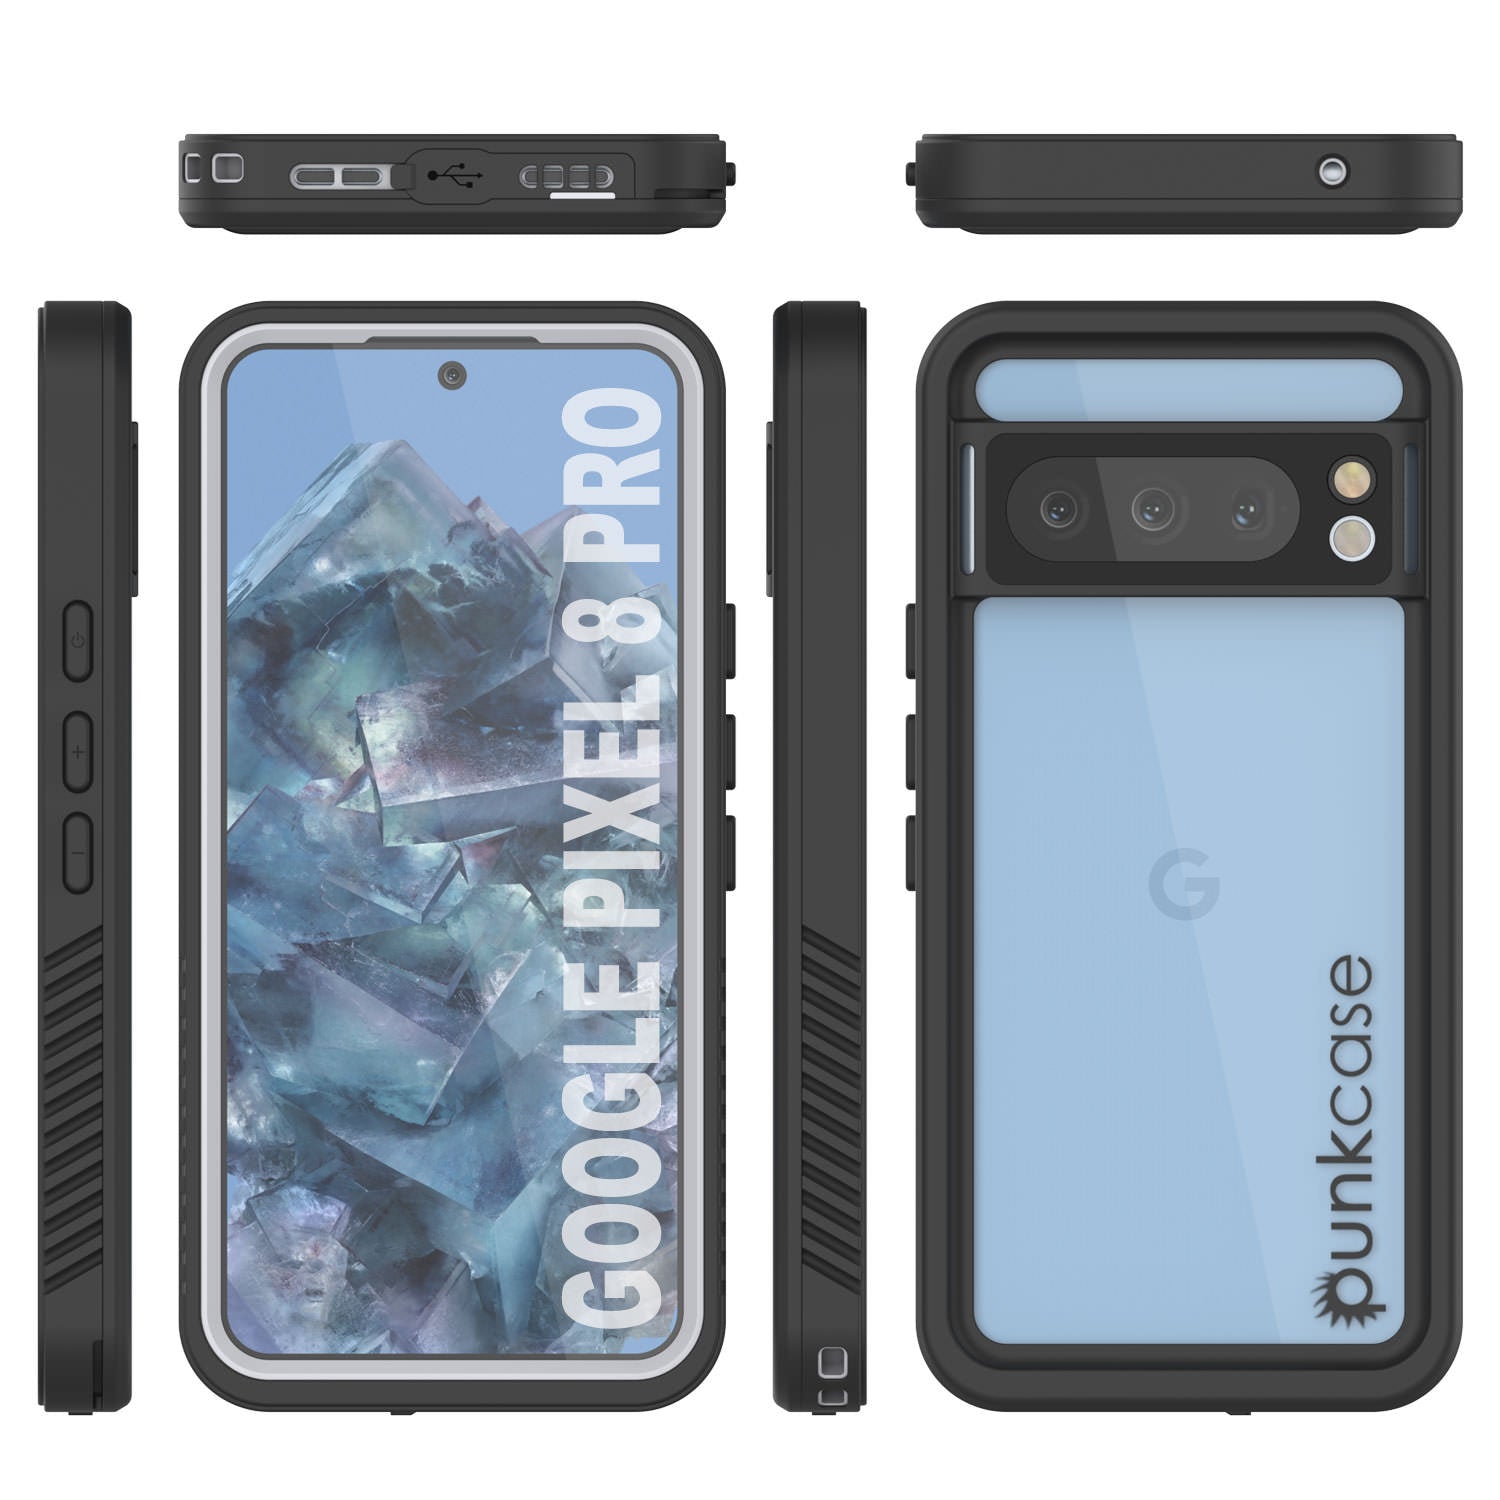 Google Pixel 8 Pro Waterproof Case, Punkcase [Extreme Series] Armor Cover W/ Built In Screen Protector [White]